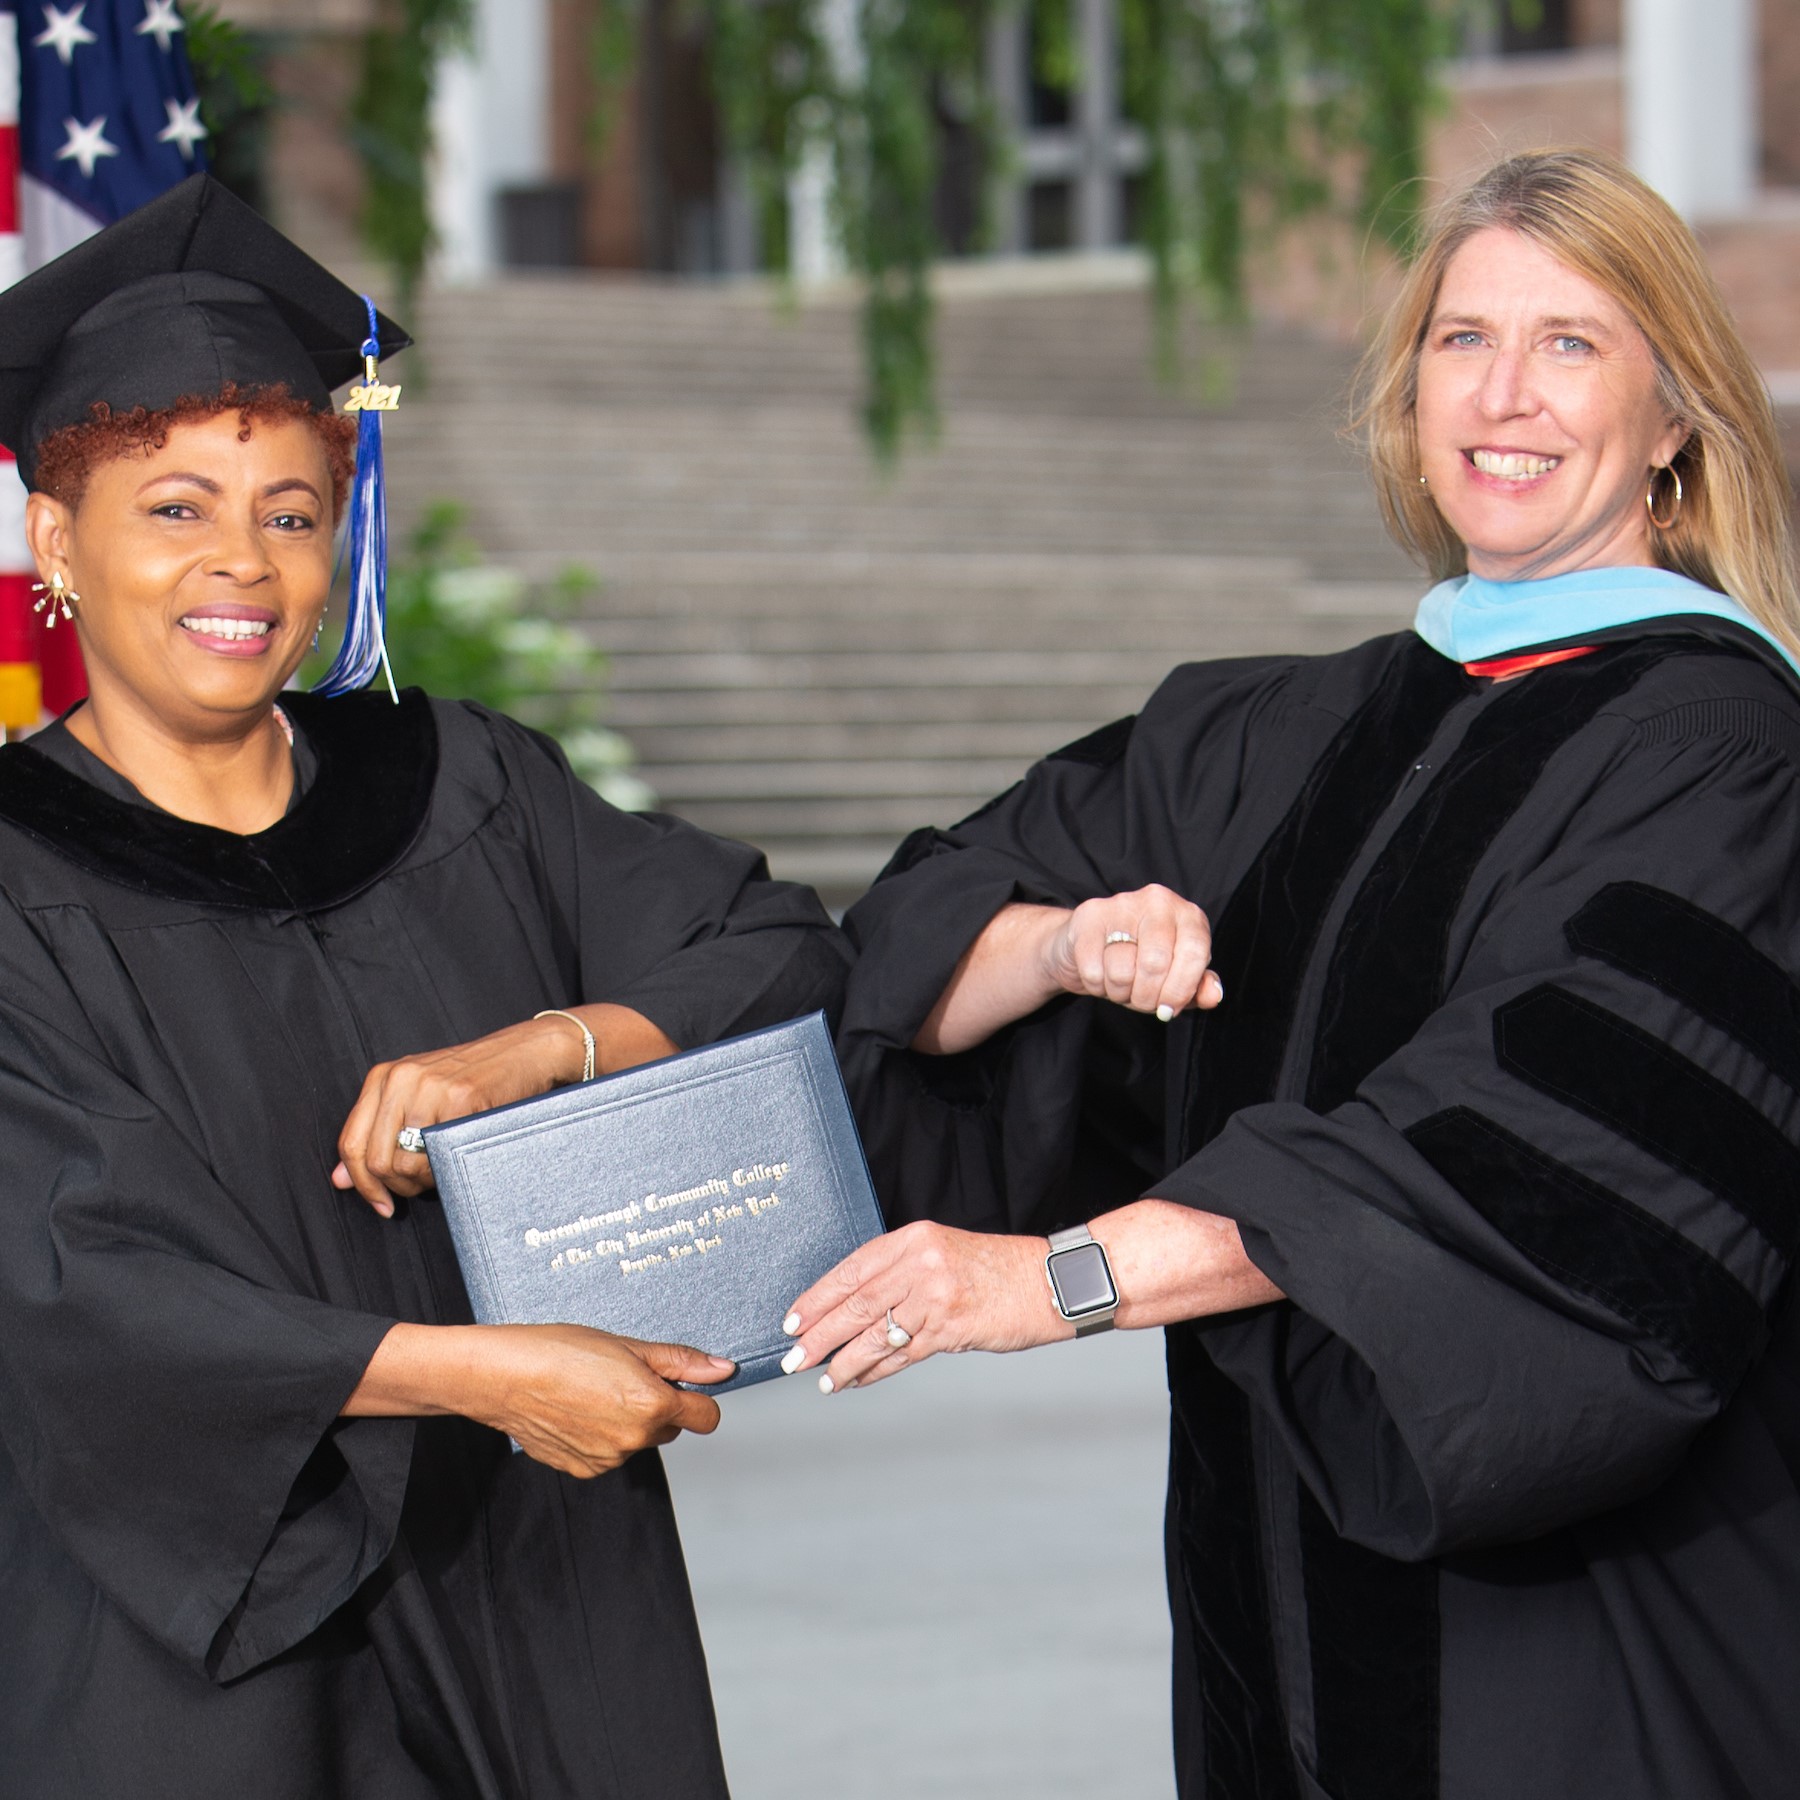 Nicole Hudson bumps elbows with Queensborough Community College President Dr. Christine Mangino